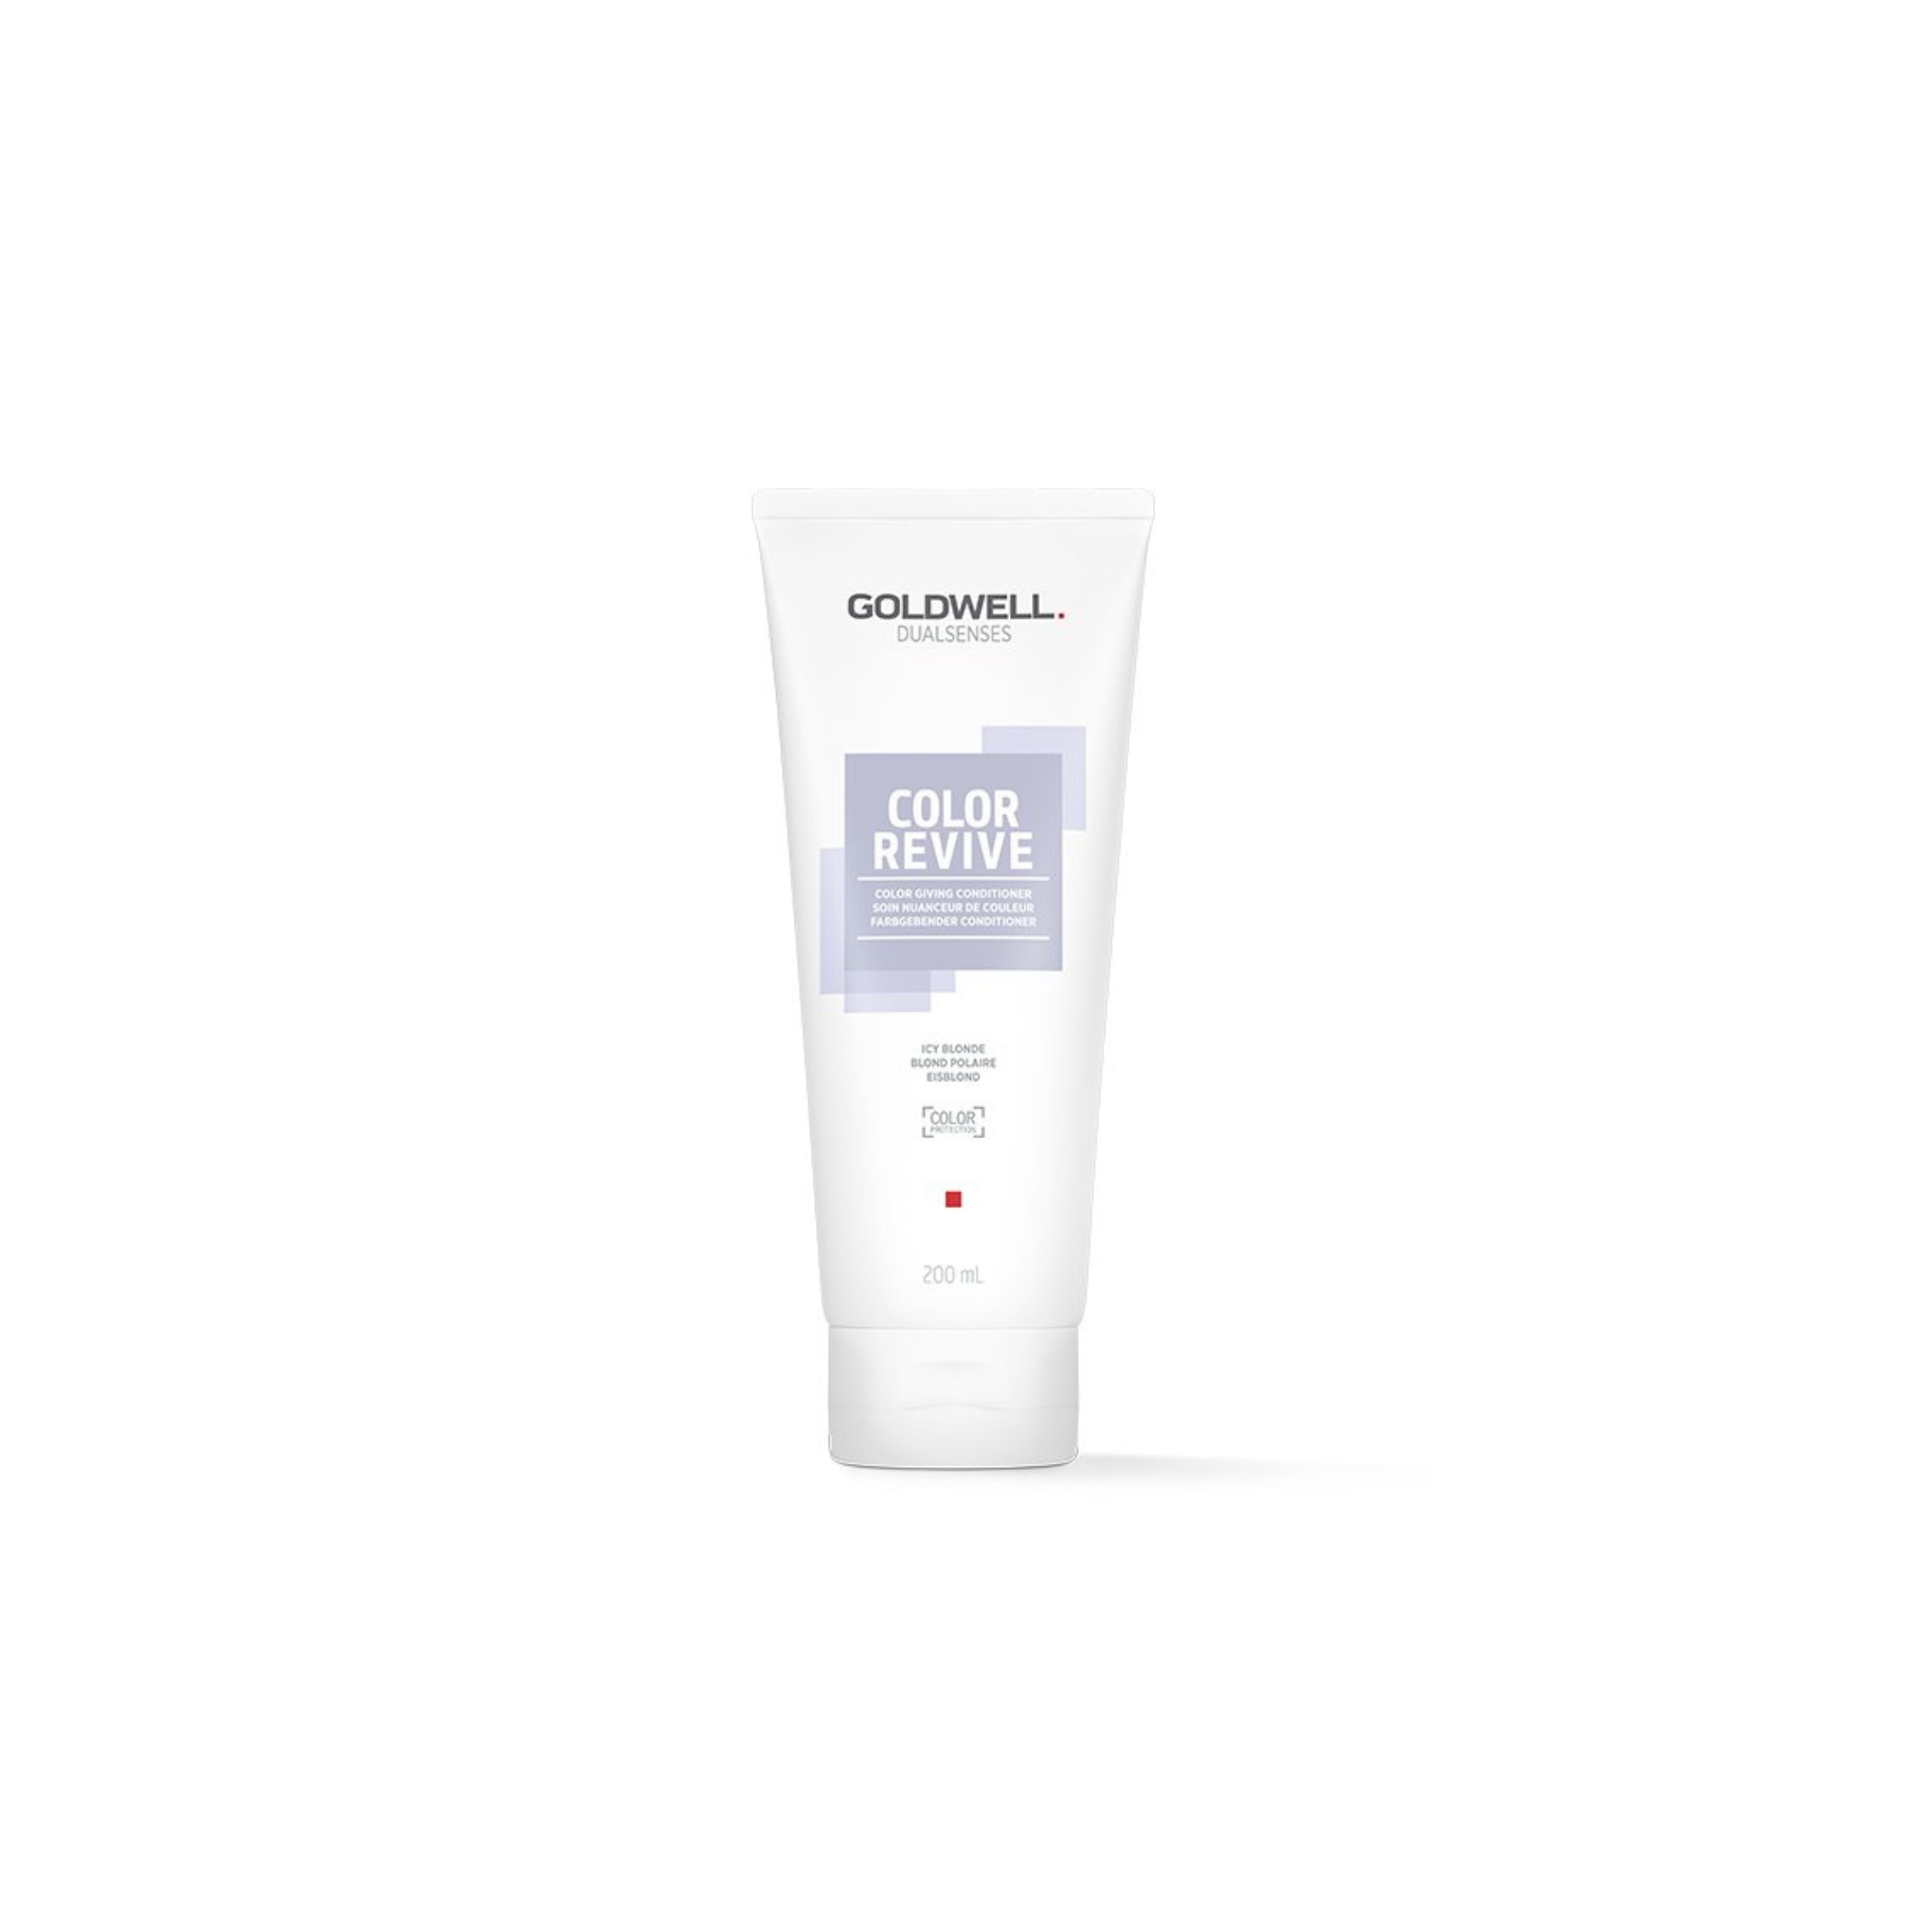 Goldwell Color Revive Color Giving Conditioner - Icy Blonde